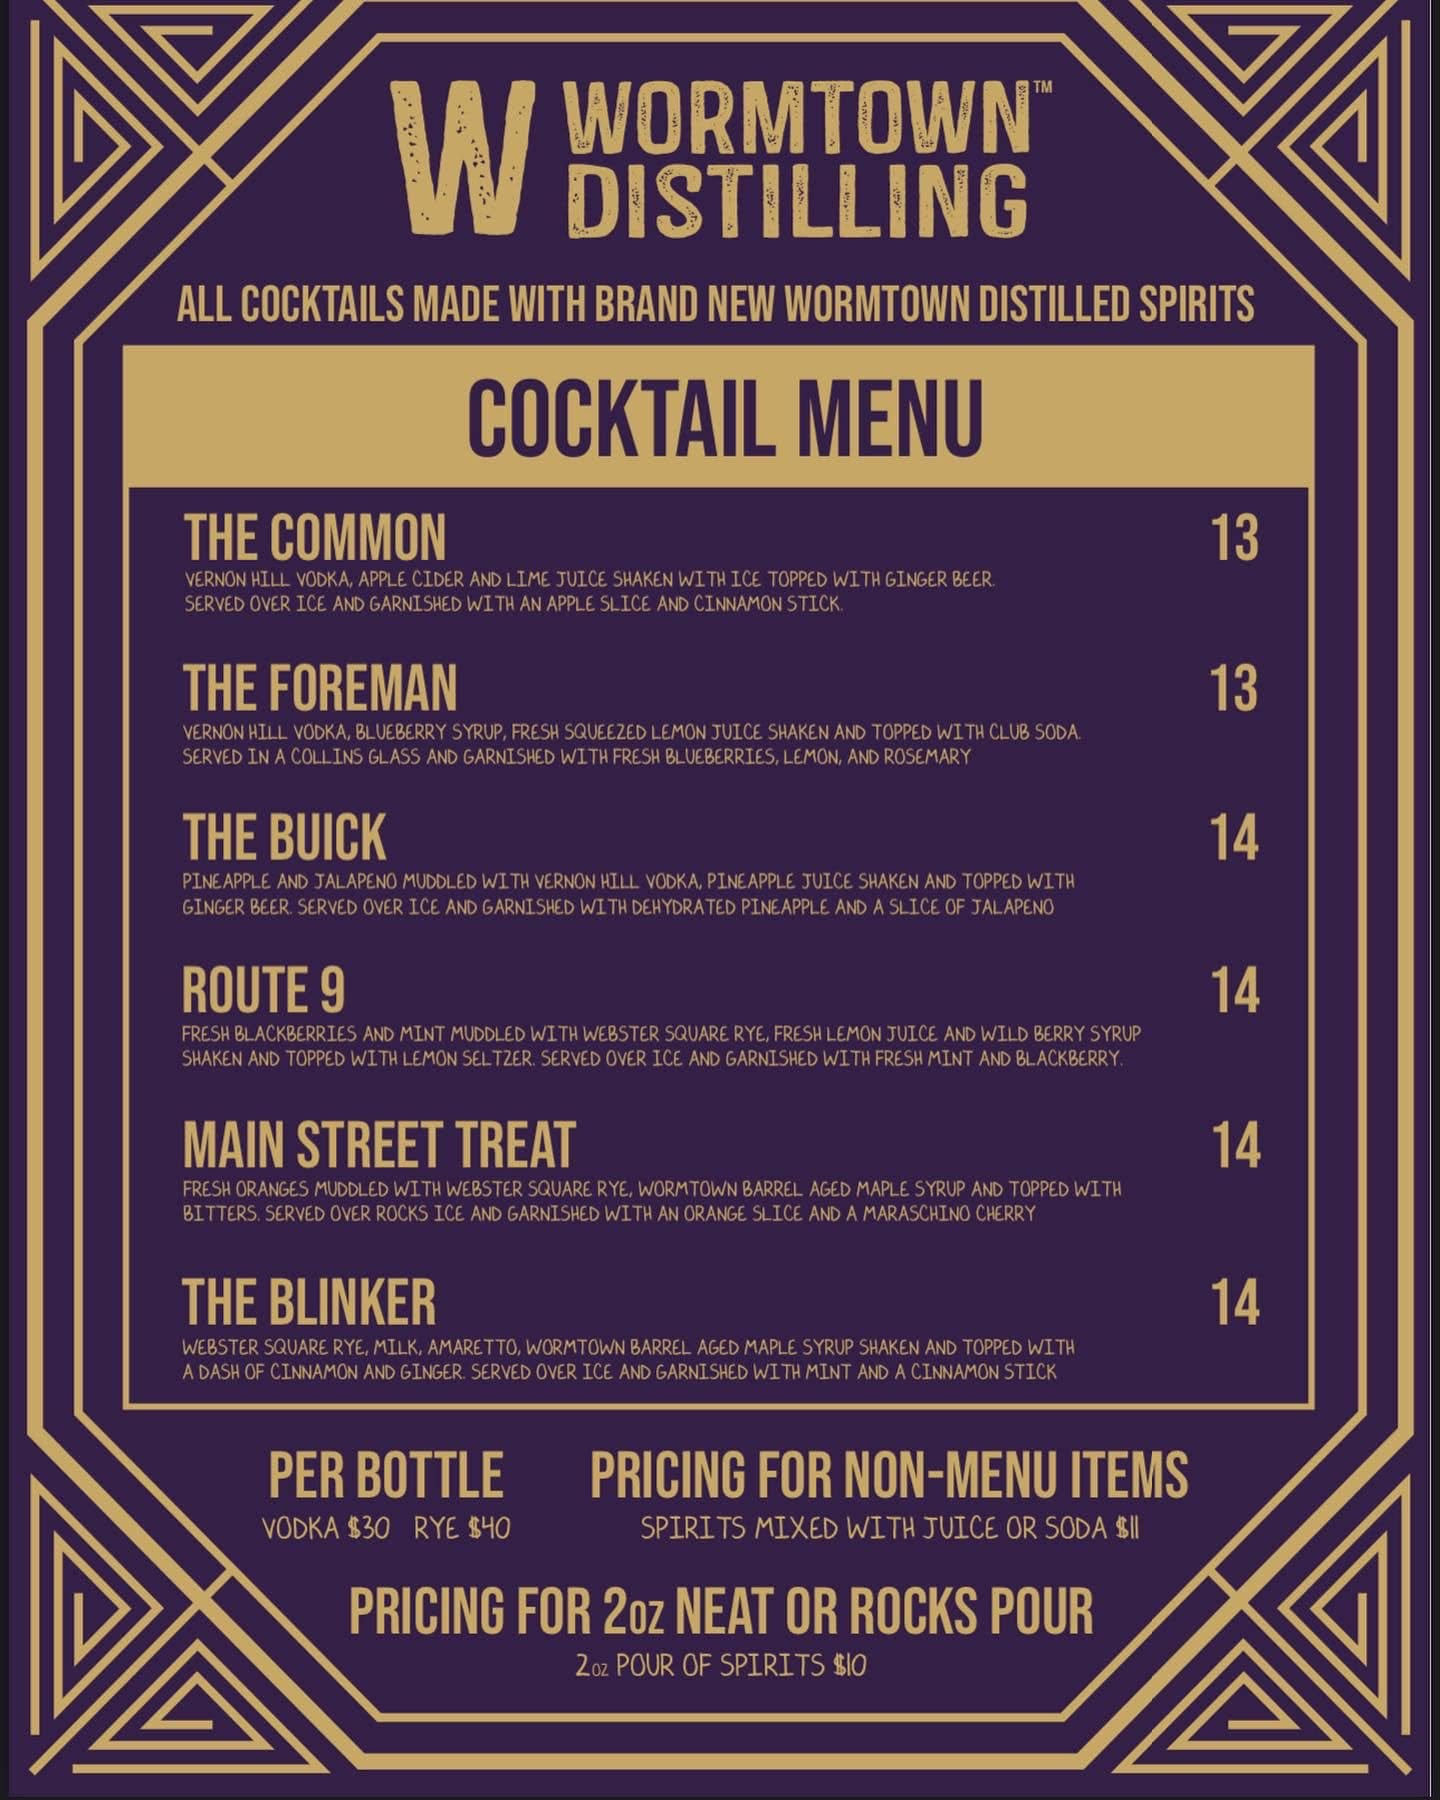 May be an image of text that says 'W WORMTOWN DISTILLING ALL COCKTAILS MADE WITH BRAND NEW WORMTOWN DISTILLED SPIRITS COCKTAIL MENU THE COMMON THE FOREMAN 13 THE BUICK 13 ROUTE 9 14 MAIN STREET TREAT 14 THE BLINKER 14 14 PRICING FOR NON-MENU ITEMS SPIRITS MIXED JUIC SODAS PER BOTTLE VODKA $30 PRICING FOR 2oz NEAT OR ROCKS POUR SPIRIT'